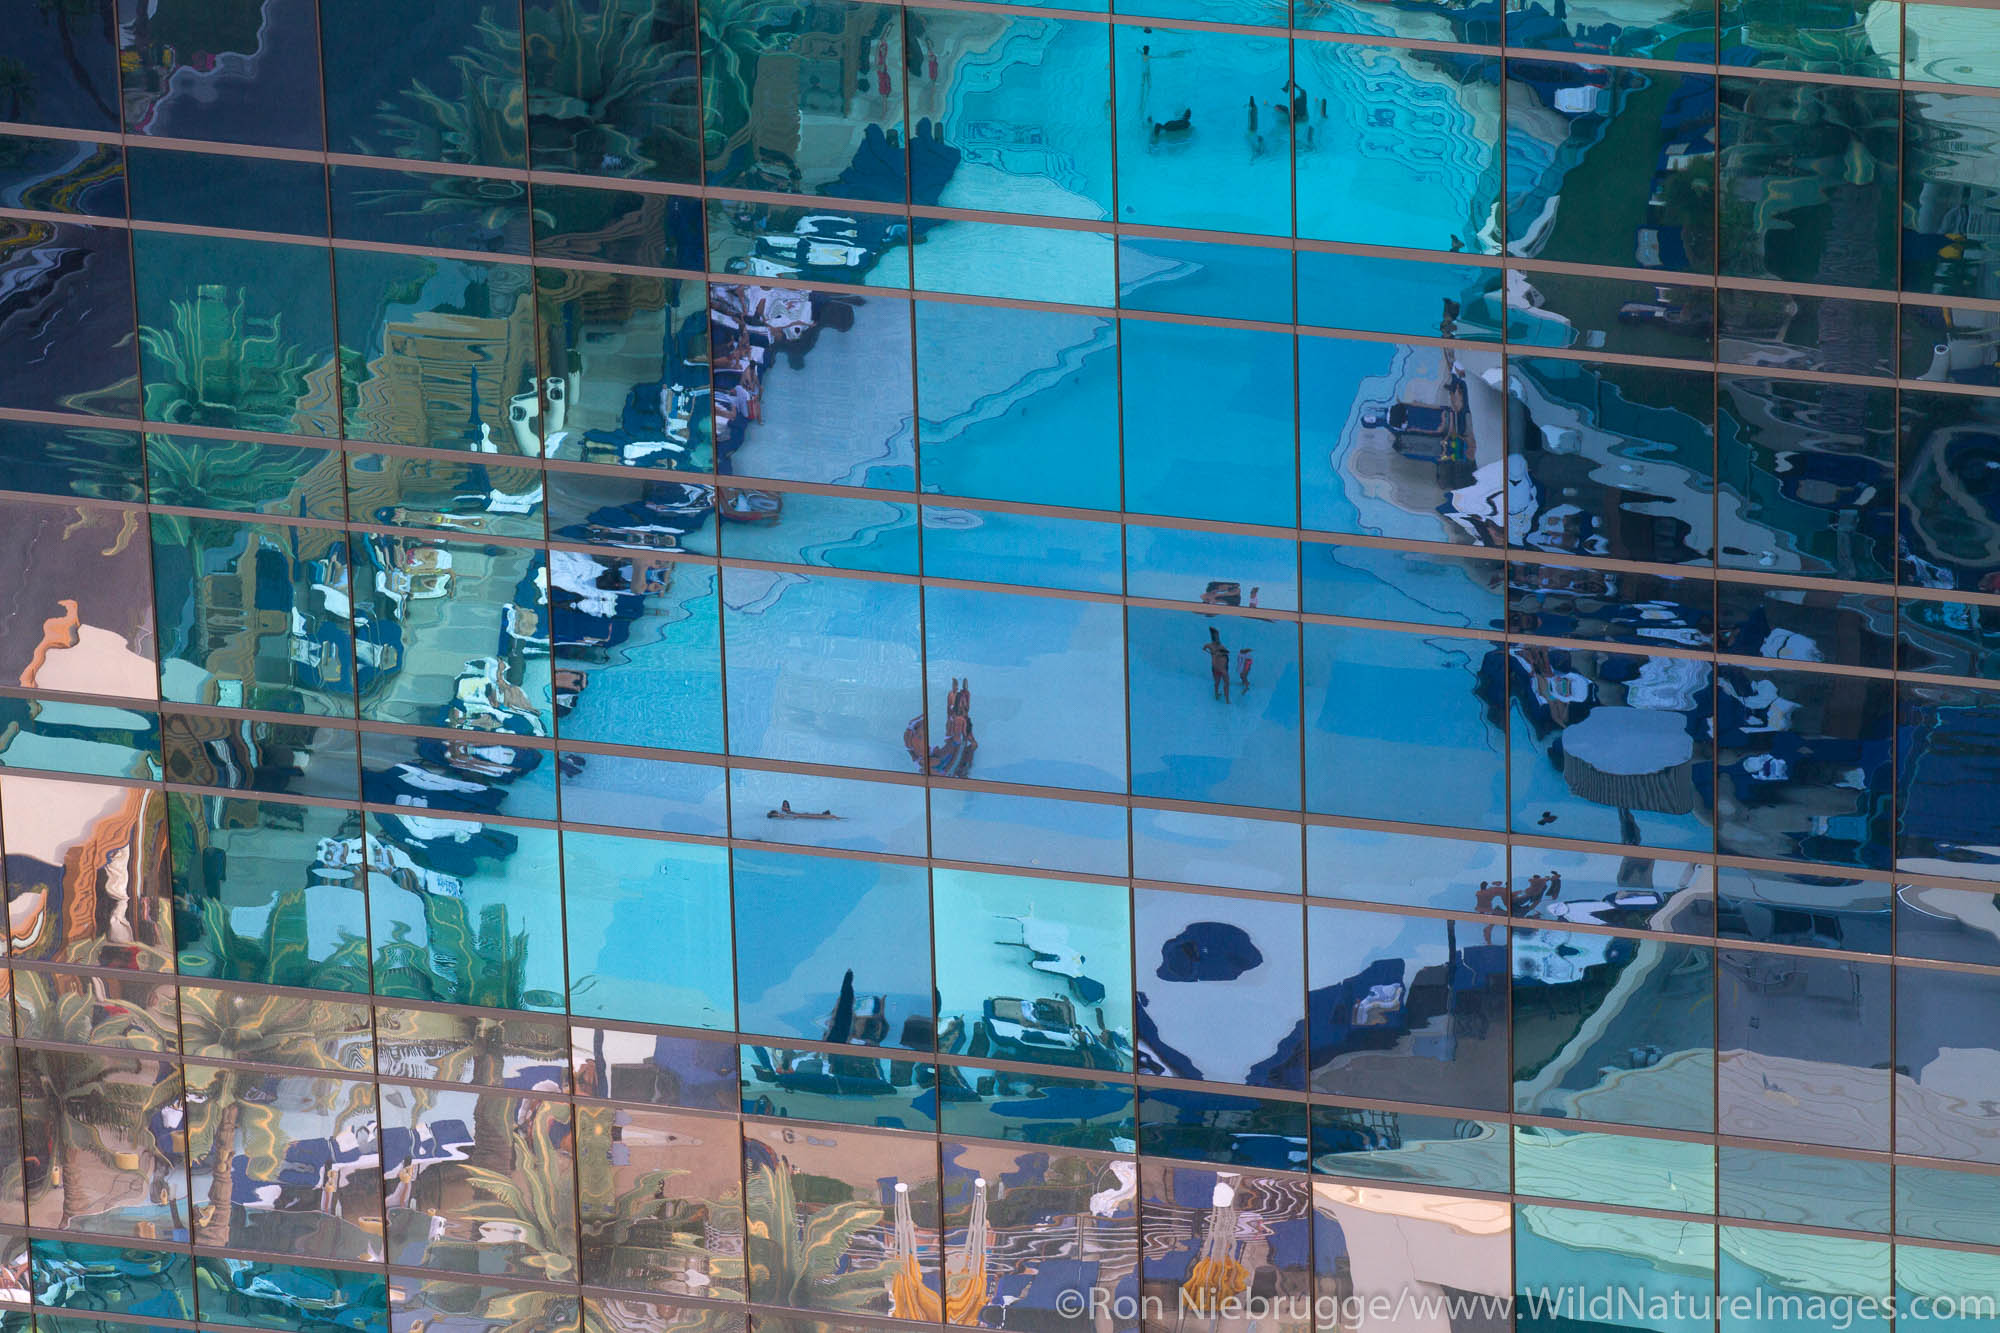 The pool of The Cosmopolitan Hotel and Casino reflect in a nearby building in City Center, Las Vegas, Nevada.